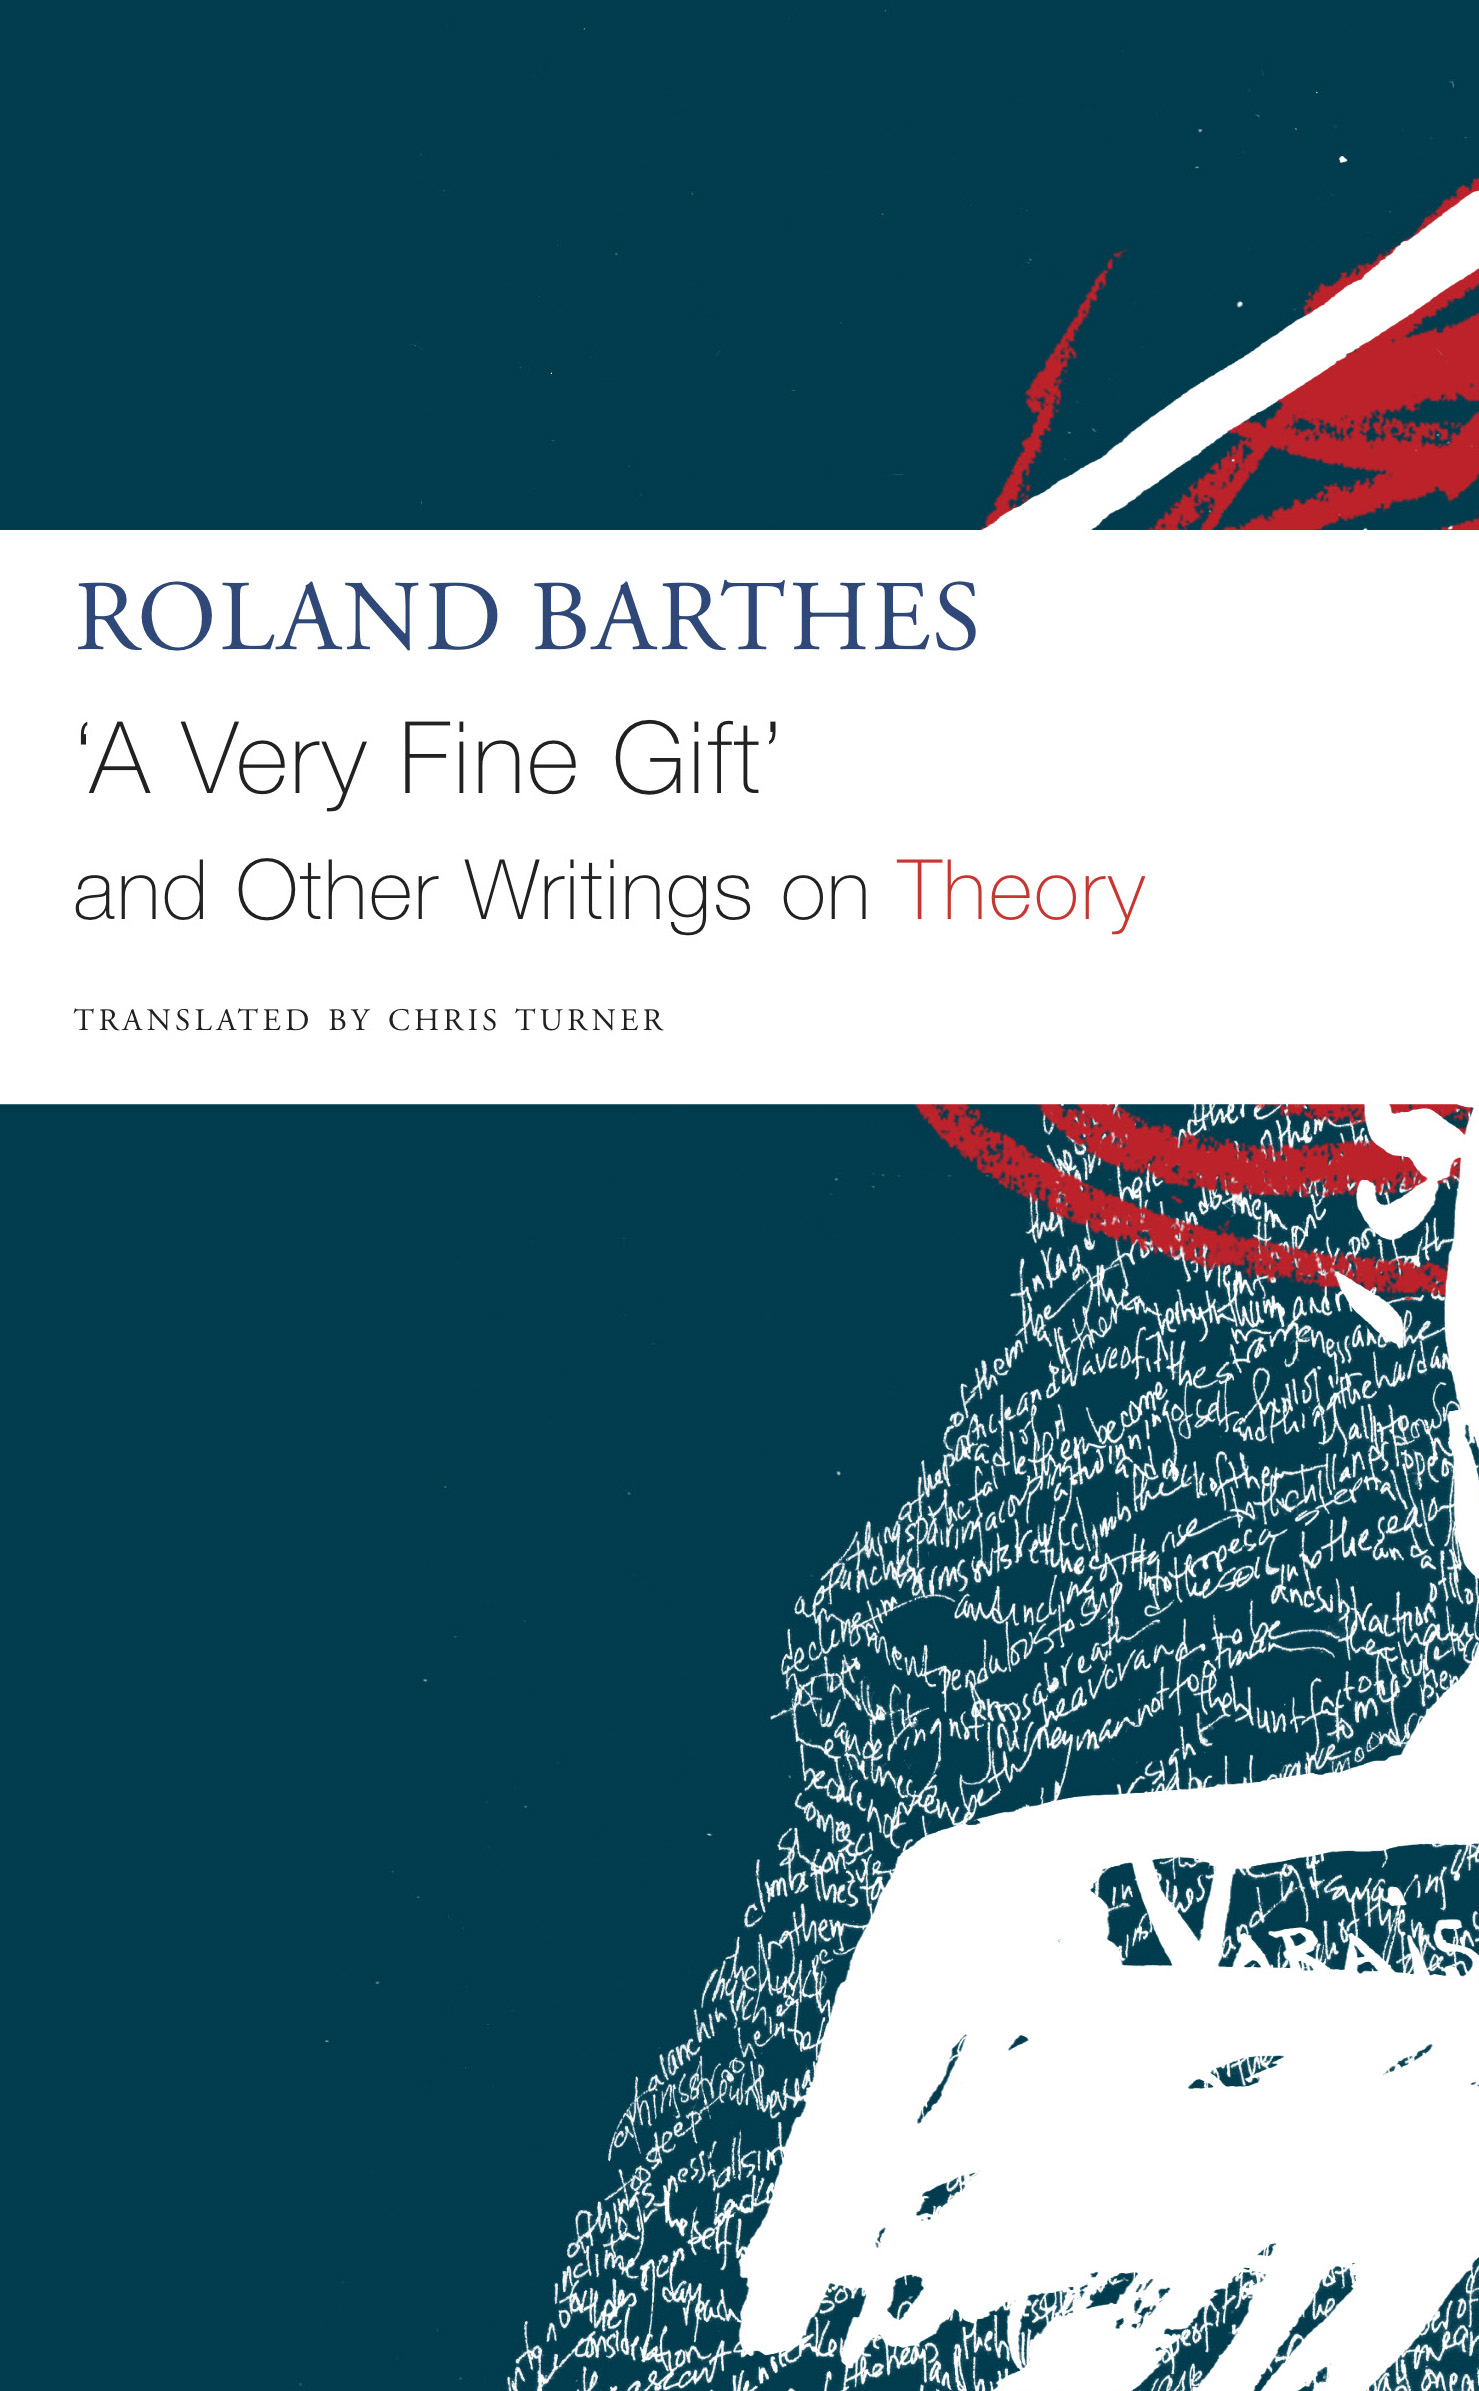 Seagull　on　Fine　by　Gift'　Books　Roland　Theory　and　Other　Writings　Barthes　A　Very